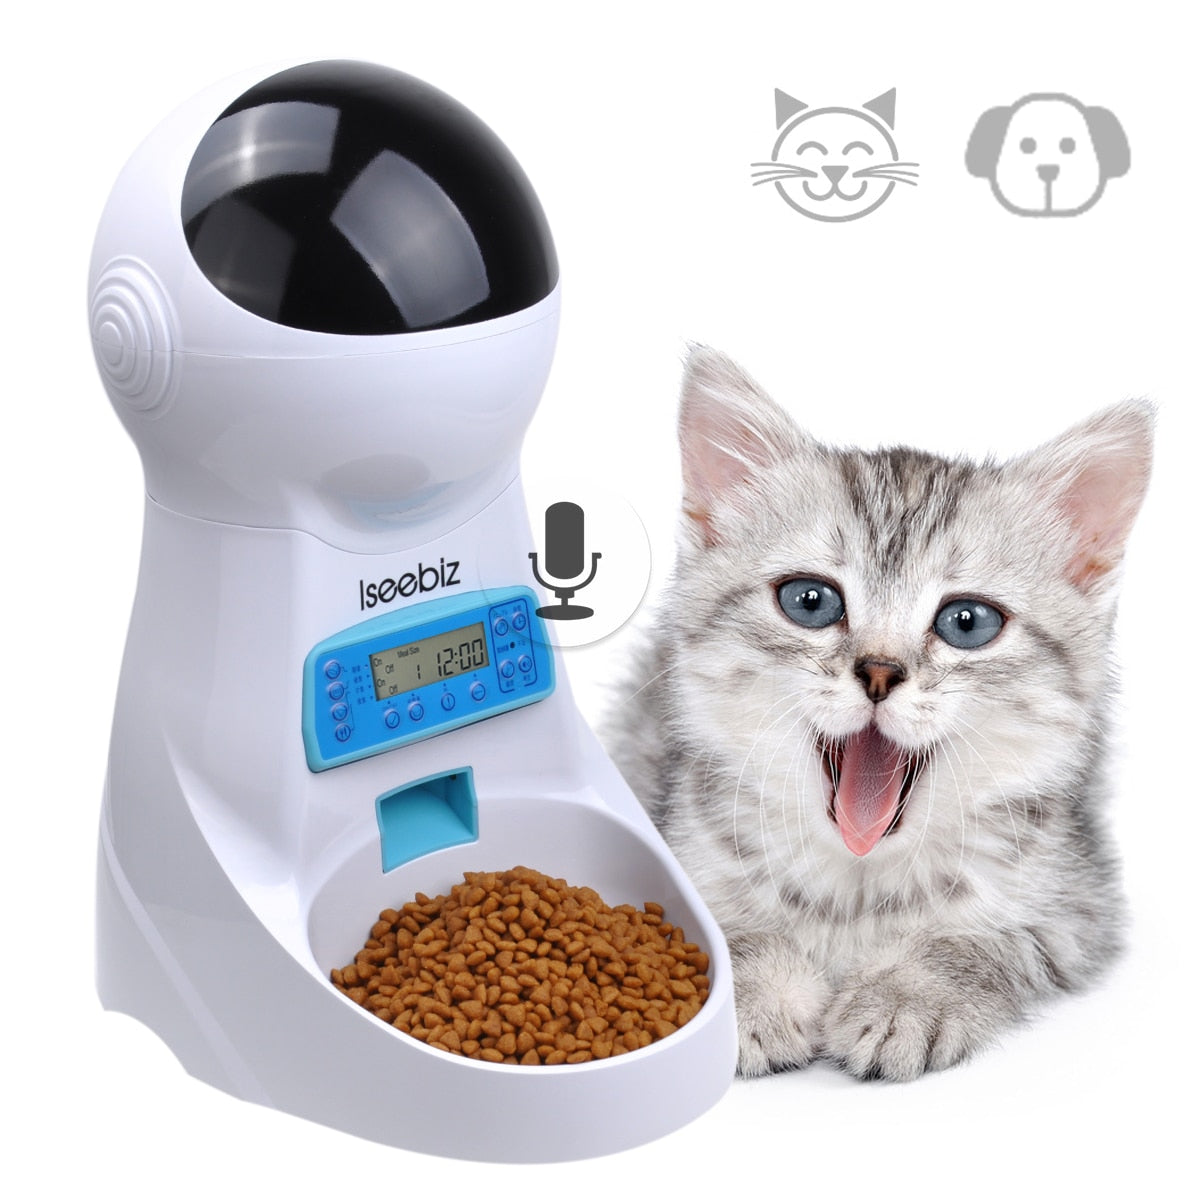 3L automatic feeder next to cat.